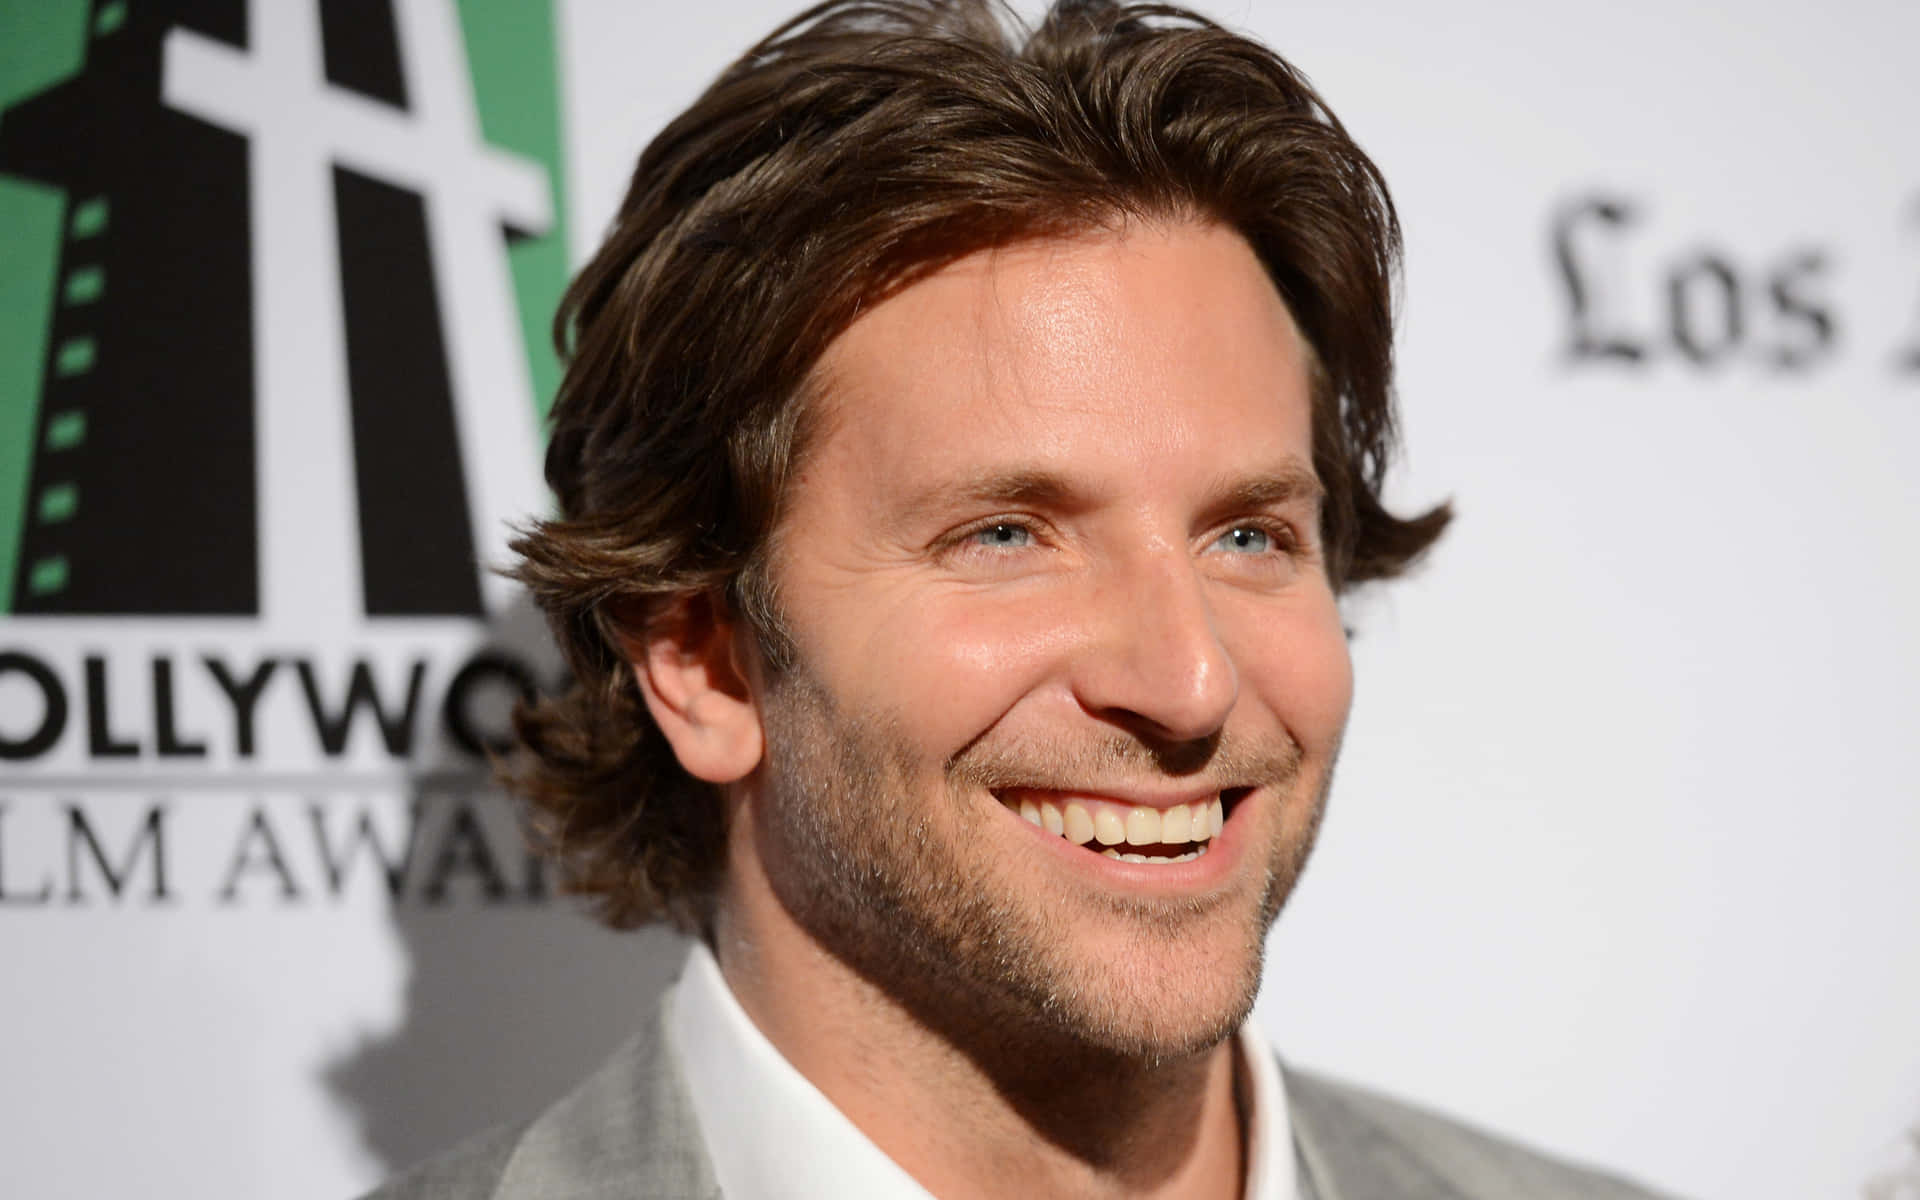 "Dedicated to his craft, Bradley Cooper celebrates a successful project."